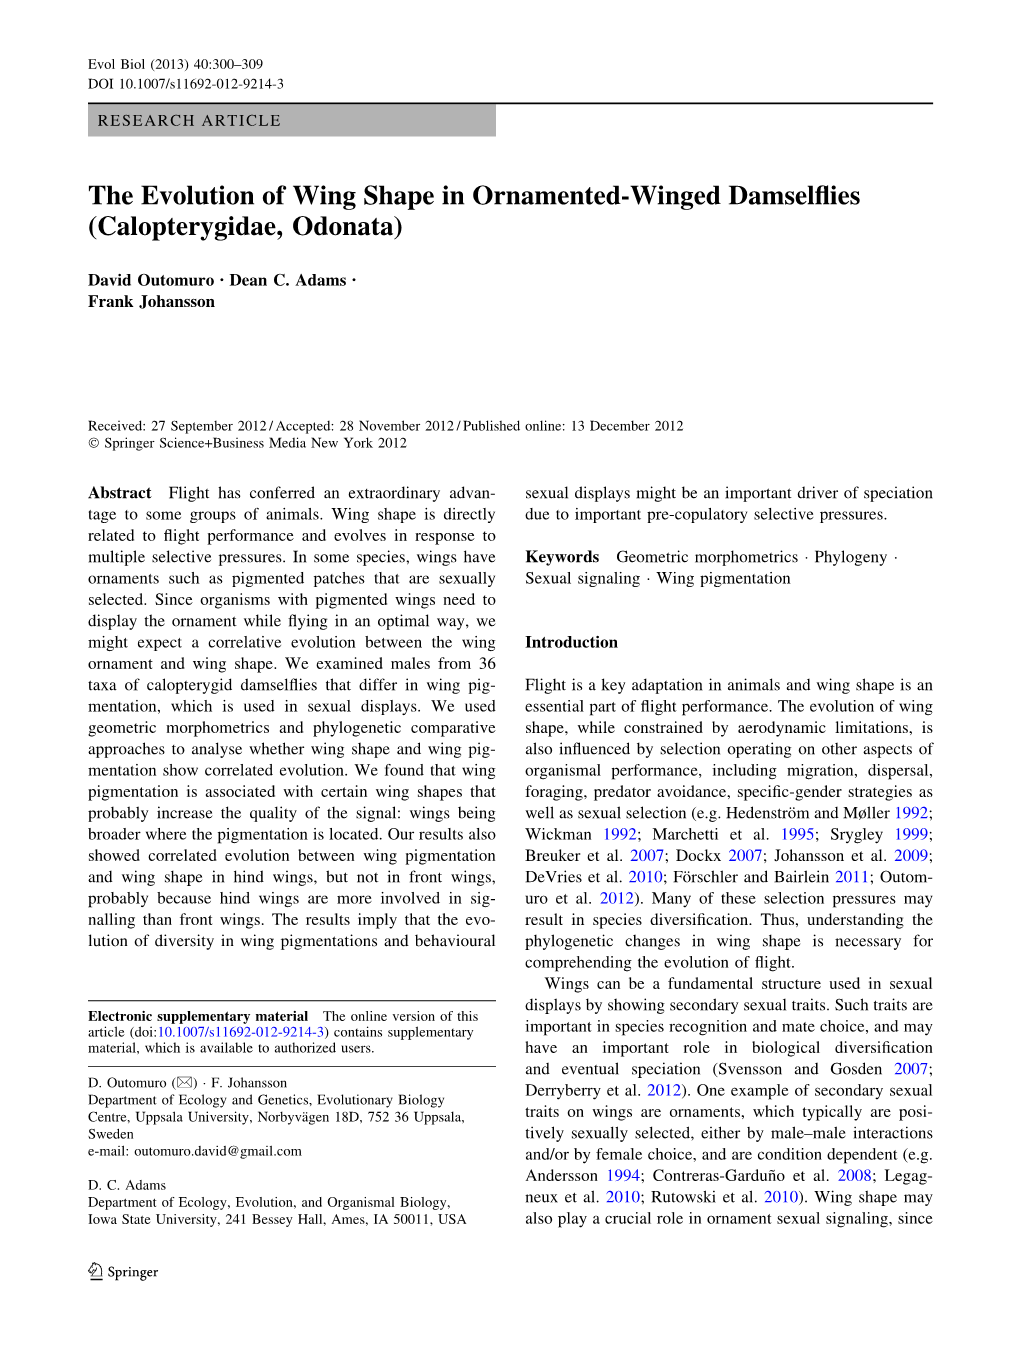 The Evolution of Wing Shape in Ornamented-Winged Damselflies